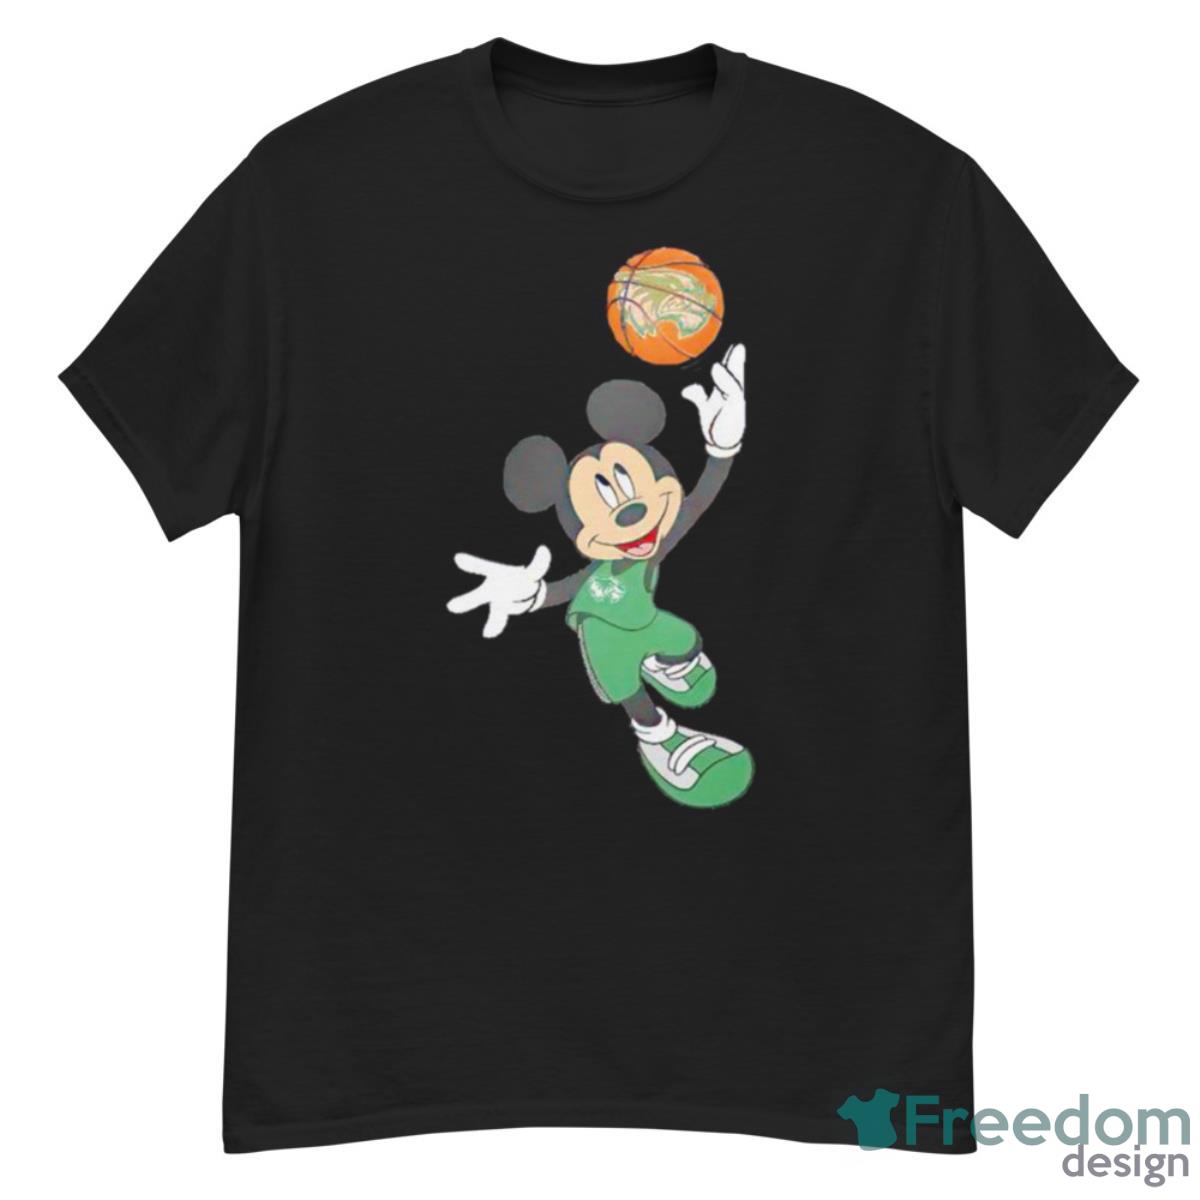 Utah Valley Wolverines Mickey March Madness Shirt - G500 Men’s Classic T-Shirt